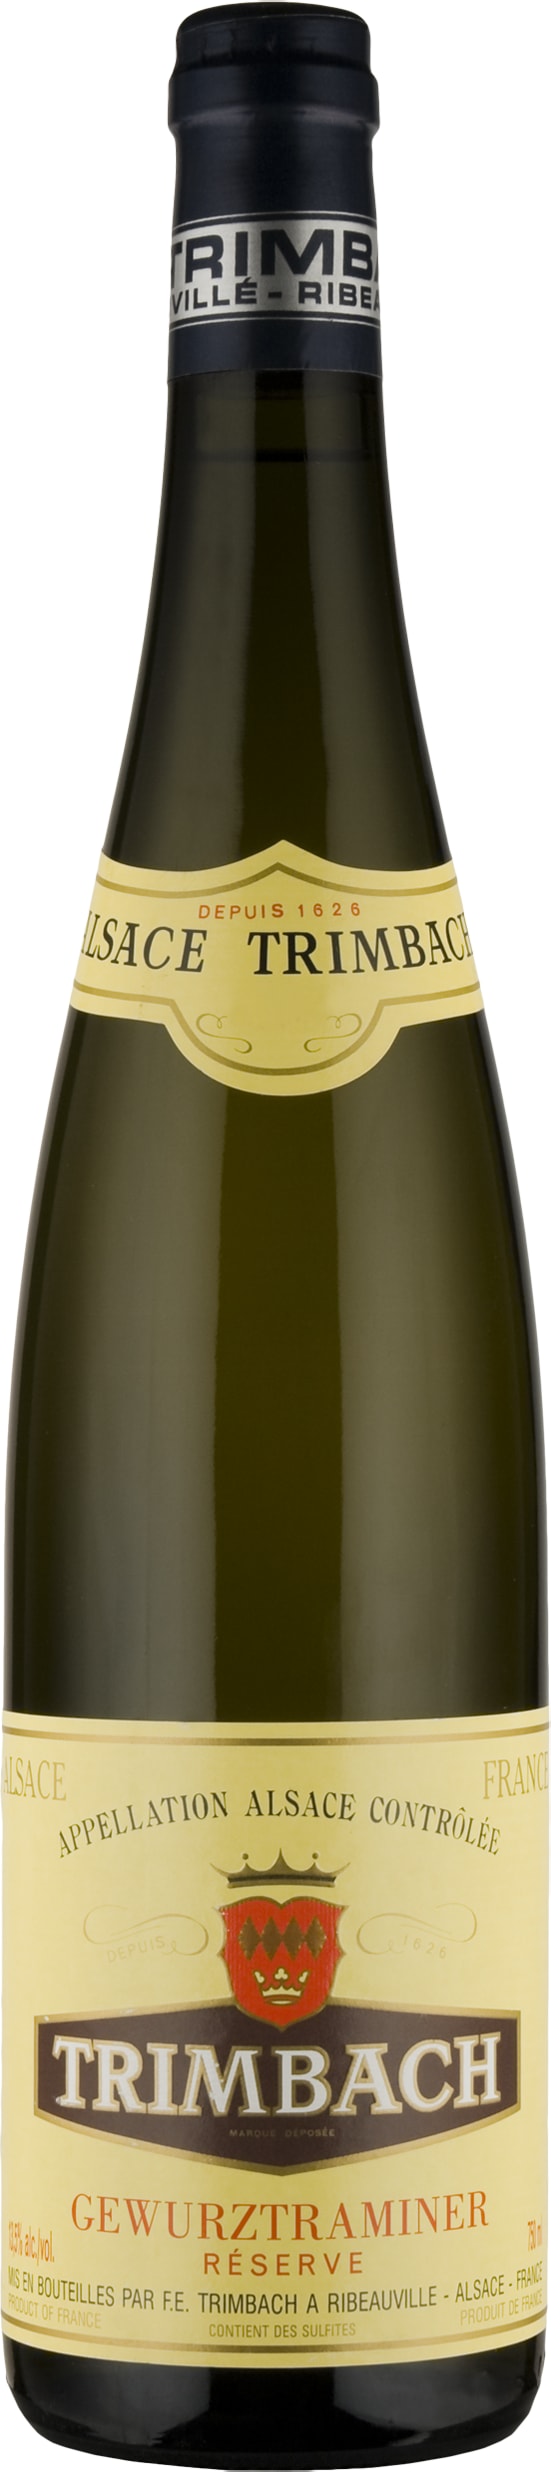 Trimbach Gewurztraminer Reserve 2017 75cl - Buy Trimbach Wines from GREAT WINES DIRECT wine shop